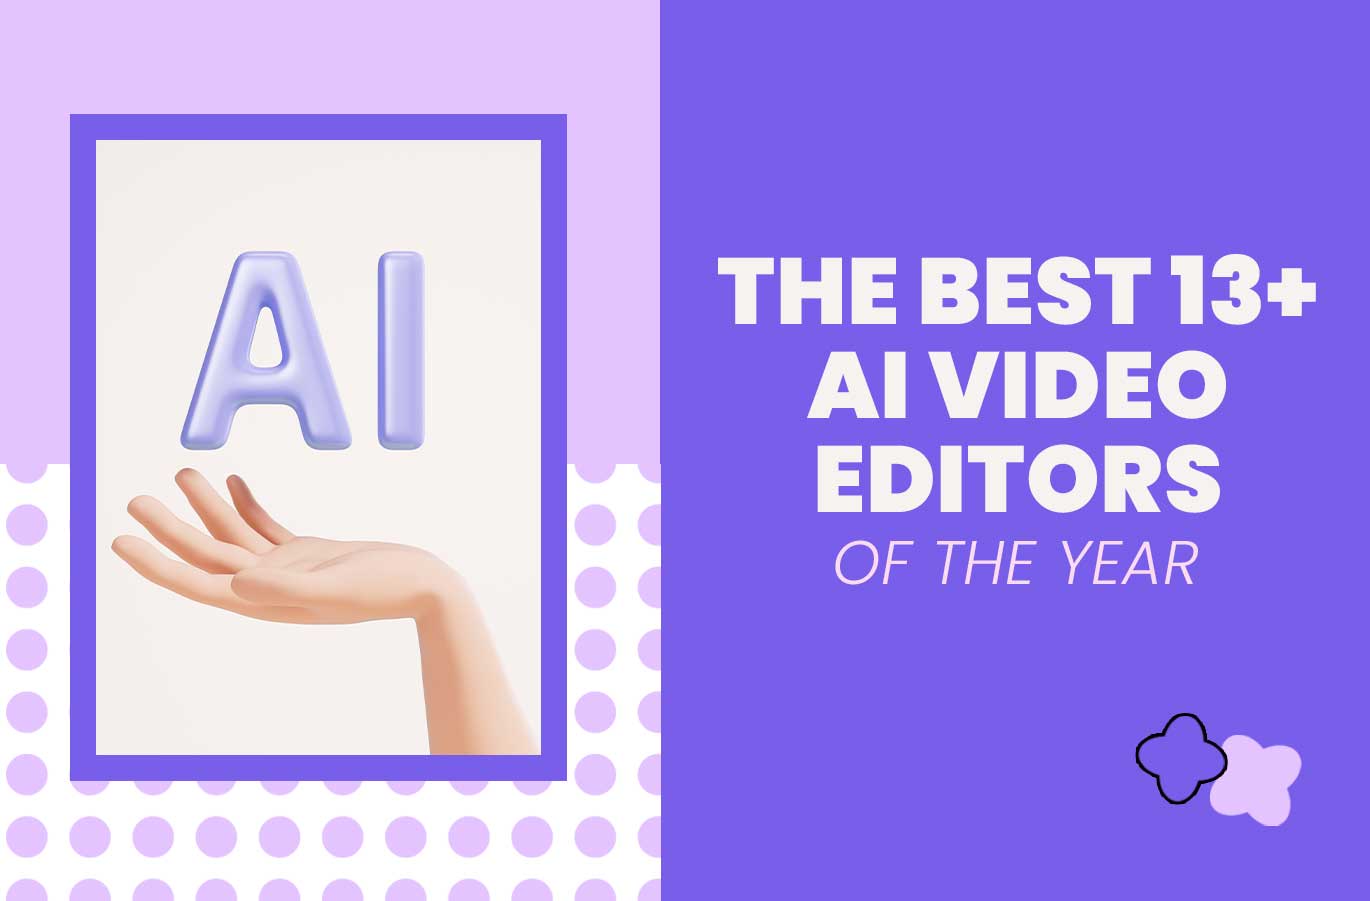 13 best AI video editors of the year